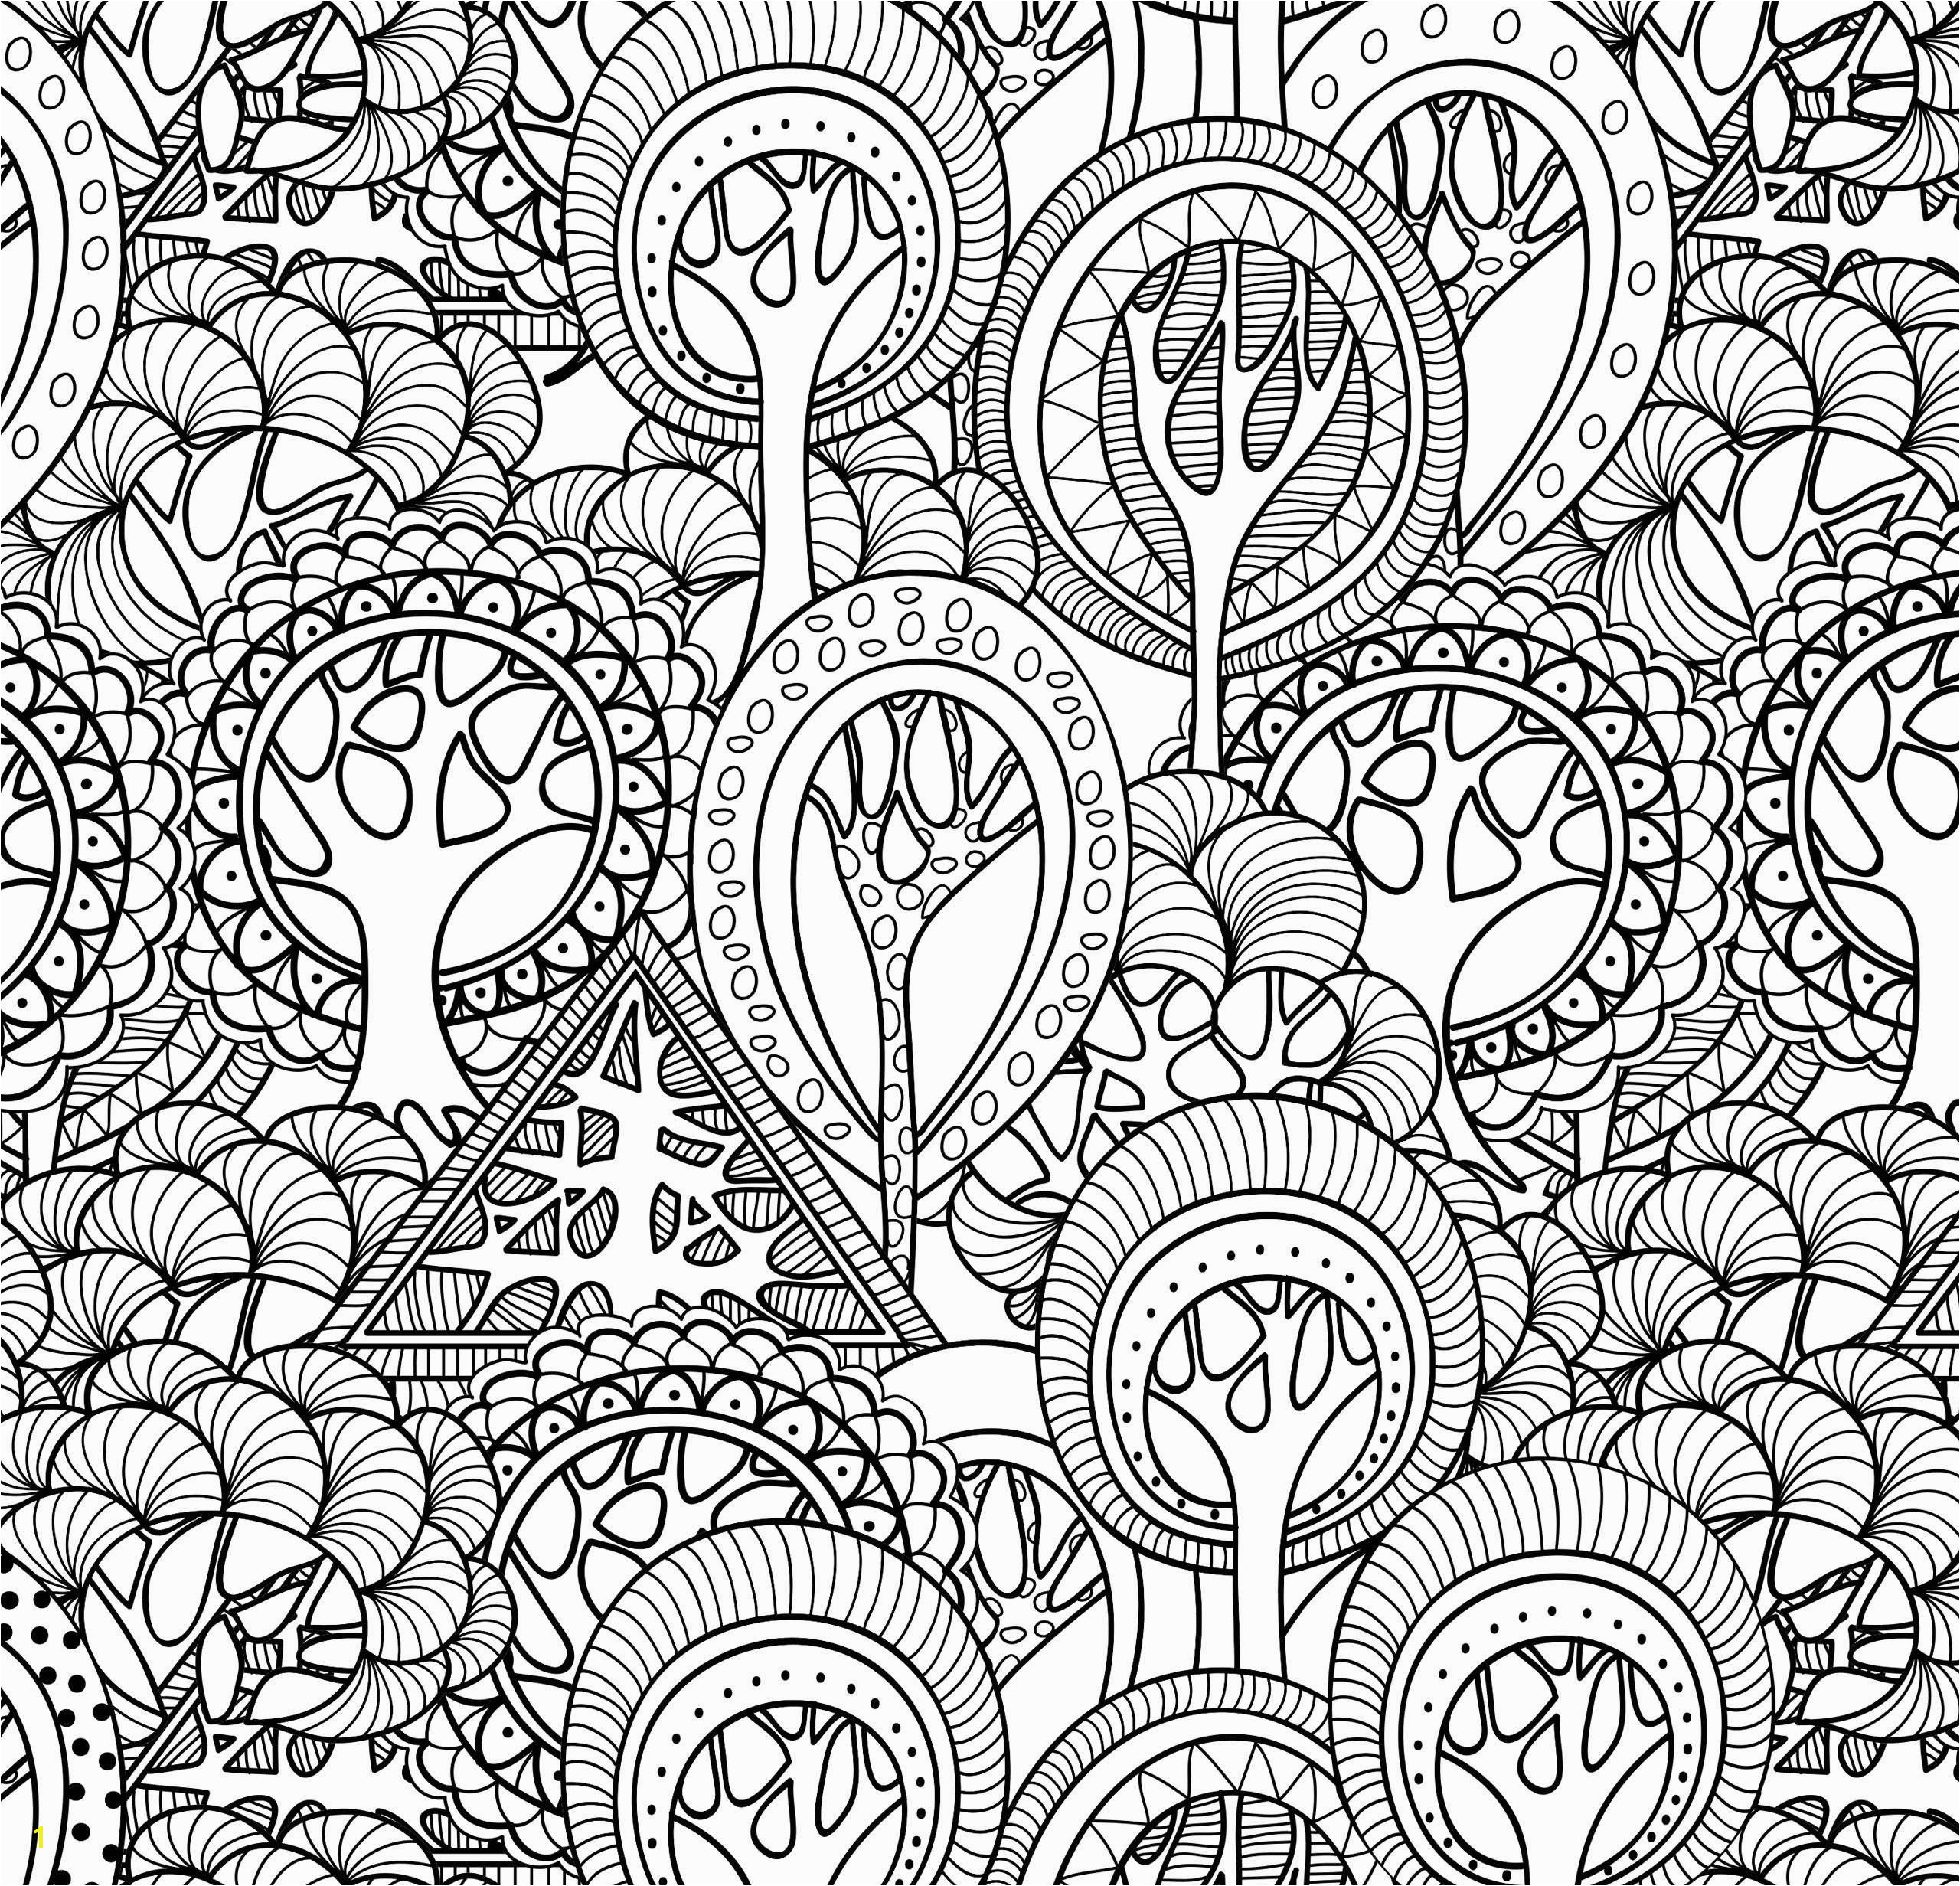 Hard Halloween Coloring Pages for Adults Intricate Coloring Pages Collection thephotosync